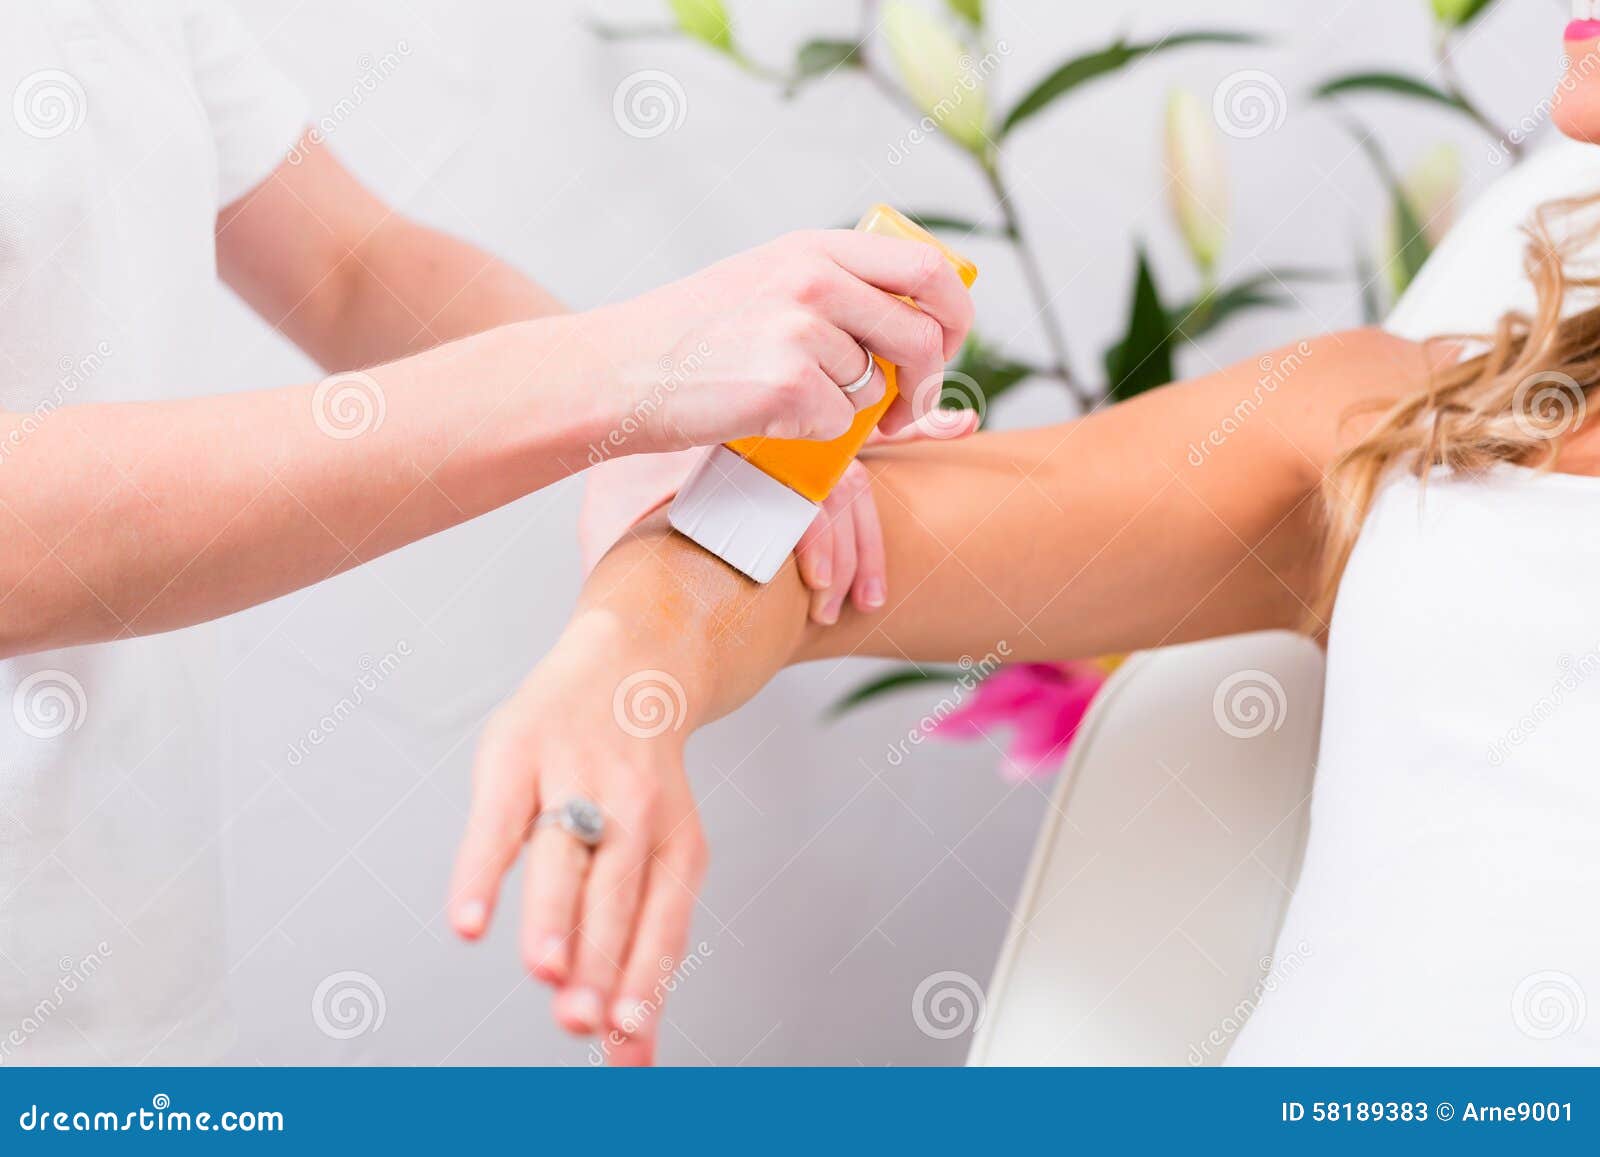 woman at waxing hair removal in beauty parlor